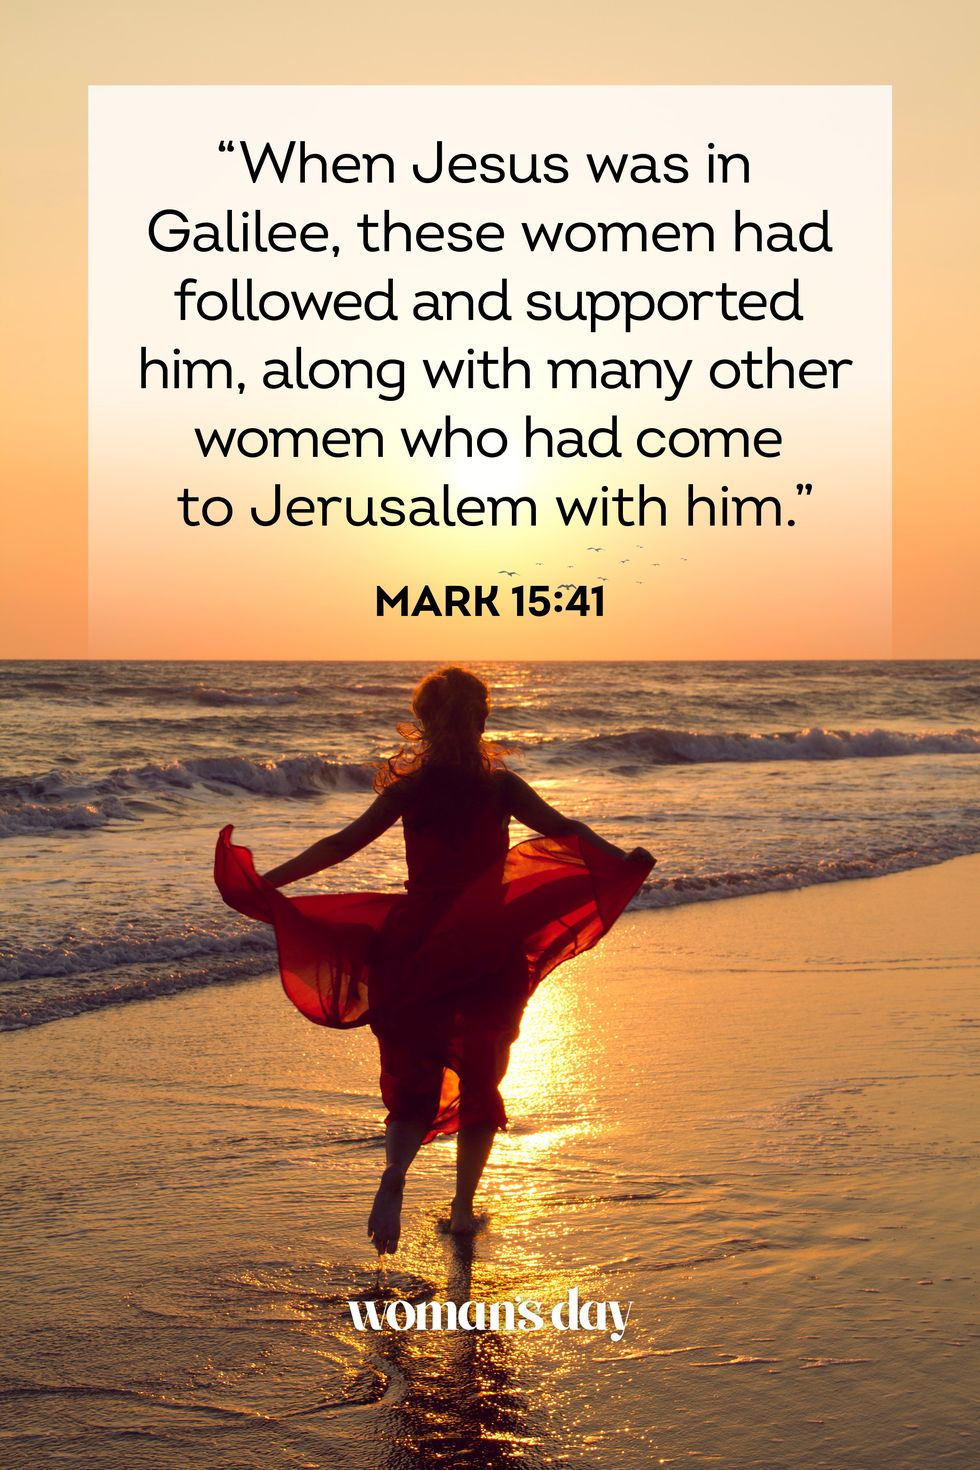 35 Bible Verses and Quotes About Women